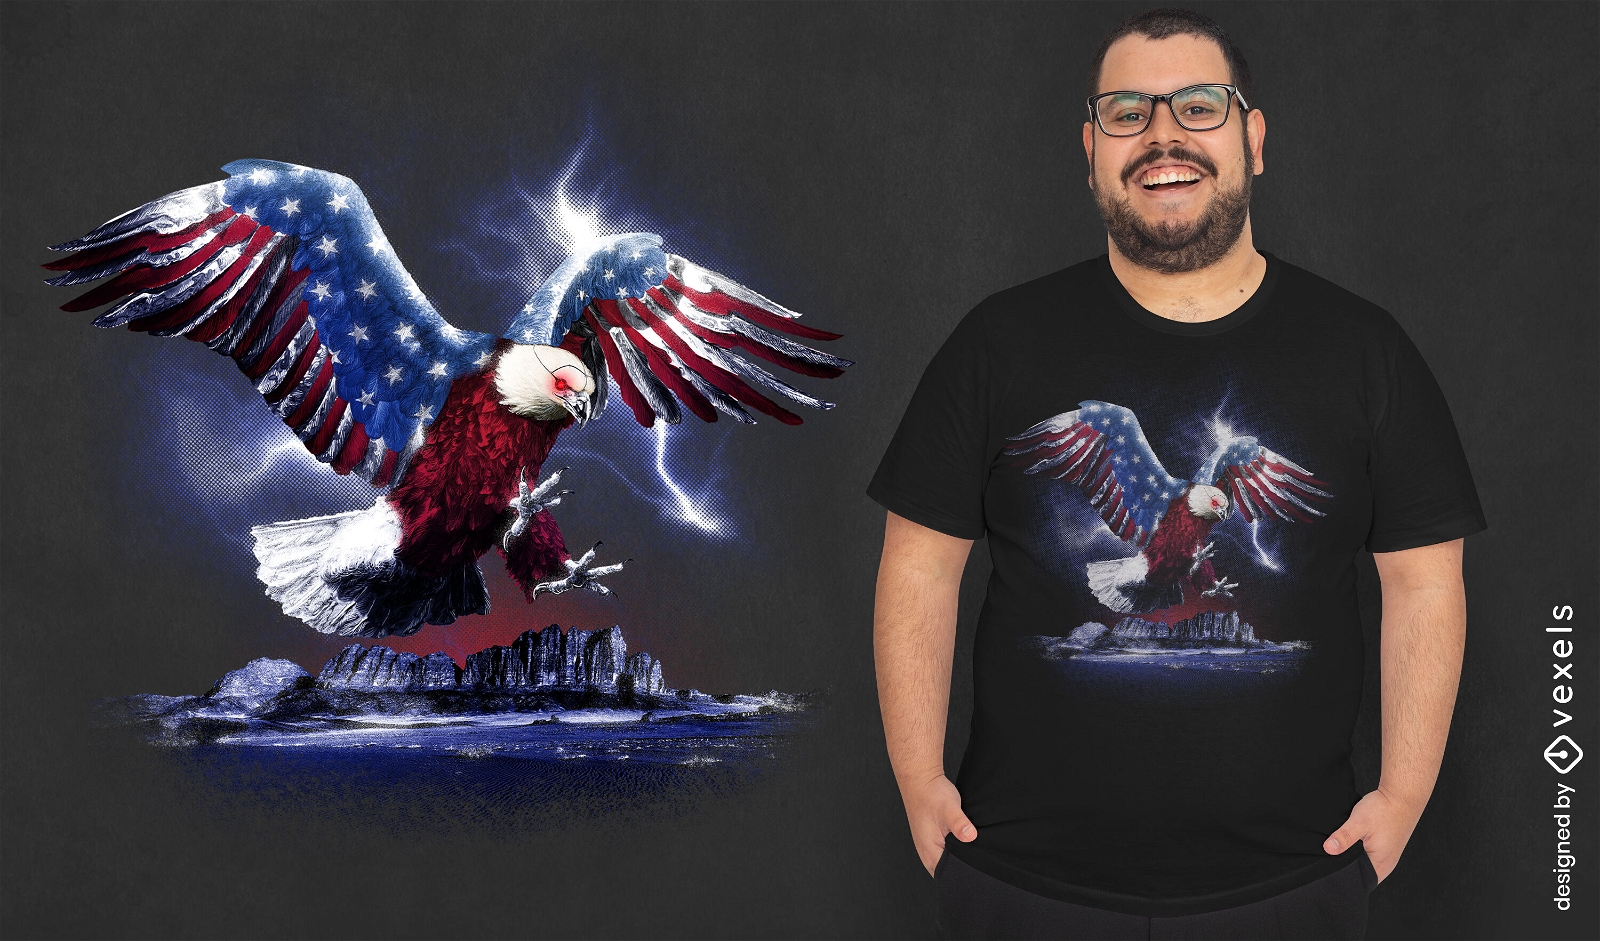 Eagle Head vector t-shirt design for commercial use - Buy t-shirt designs